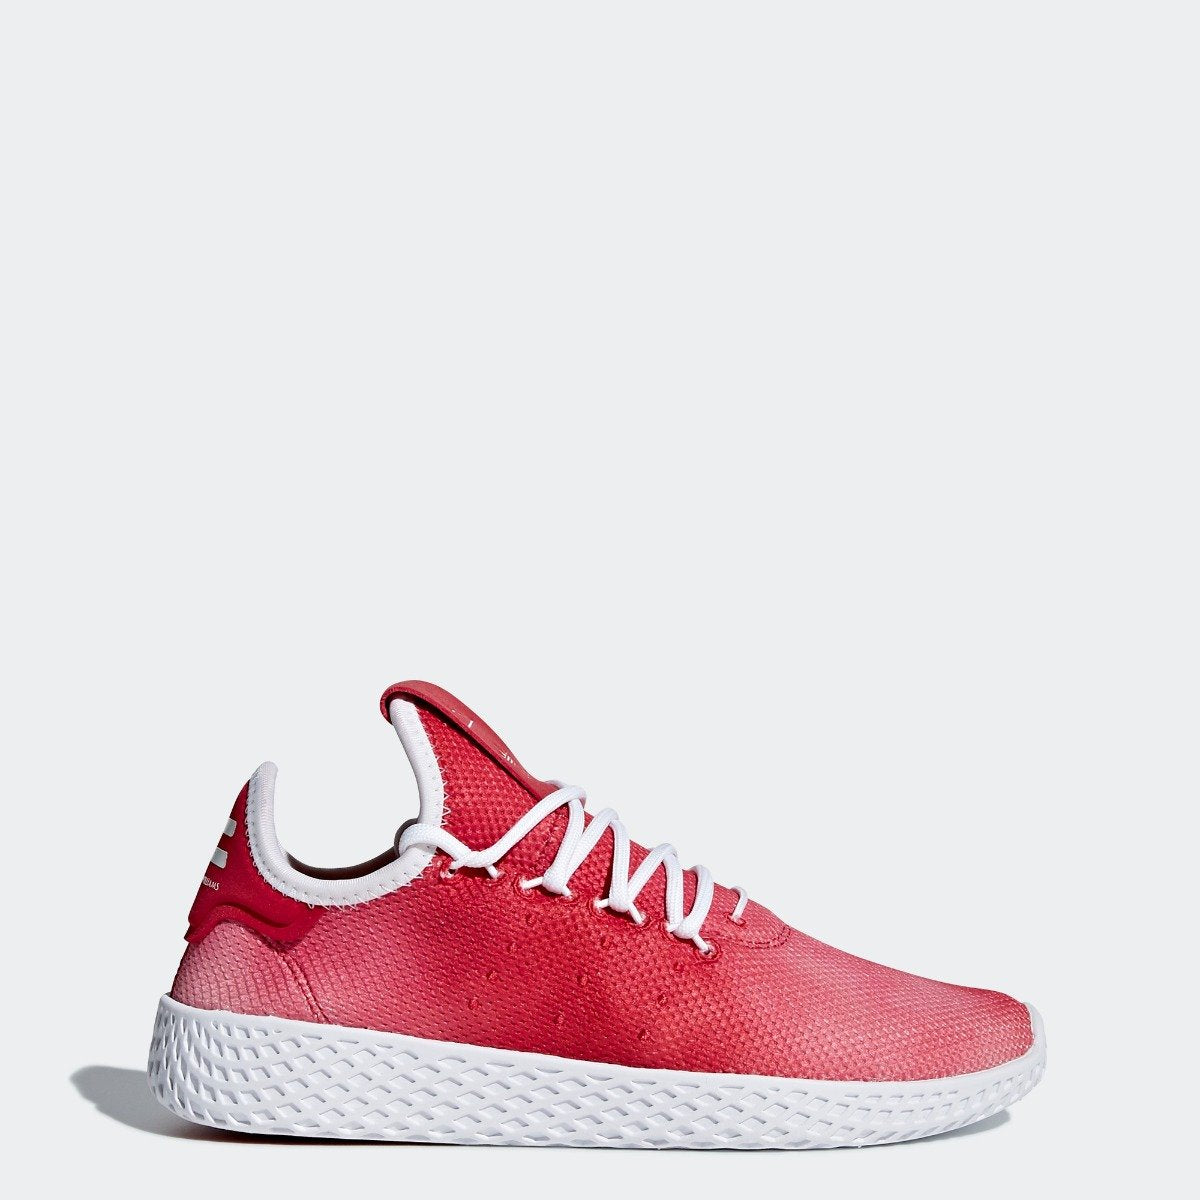 red pharrell williams shoes